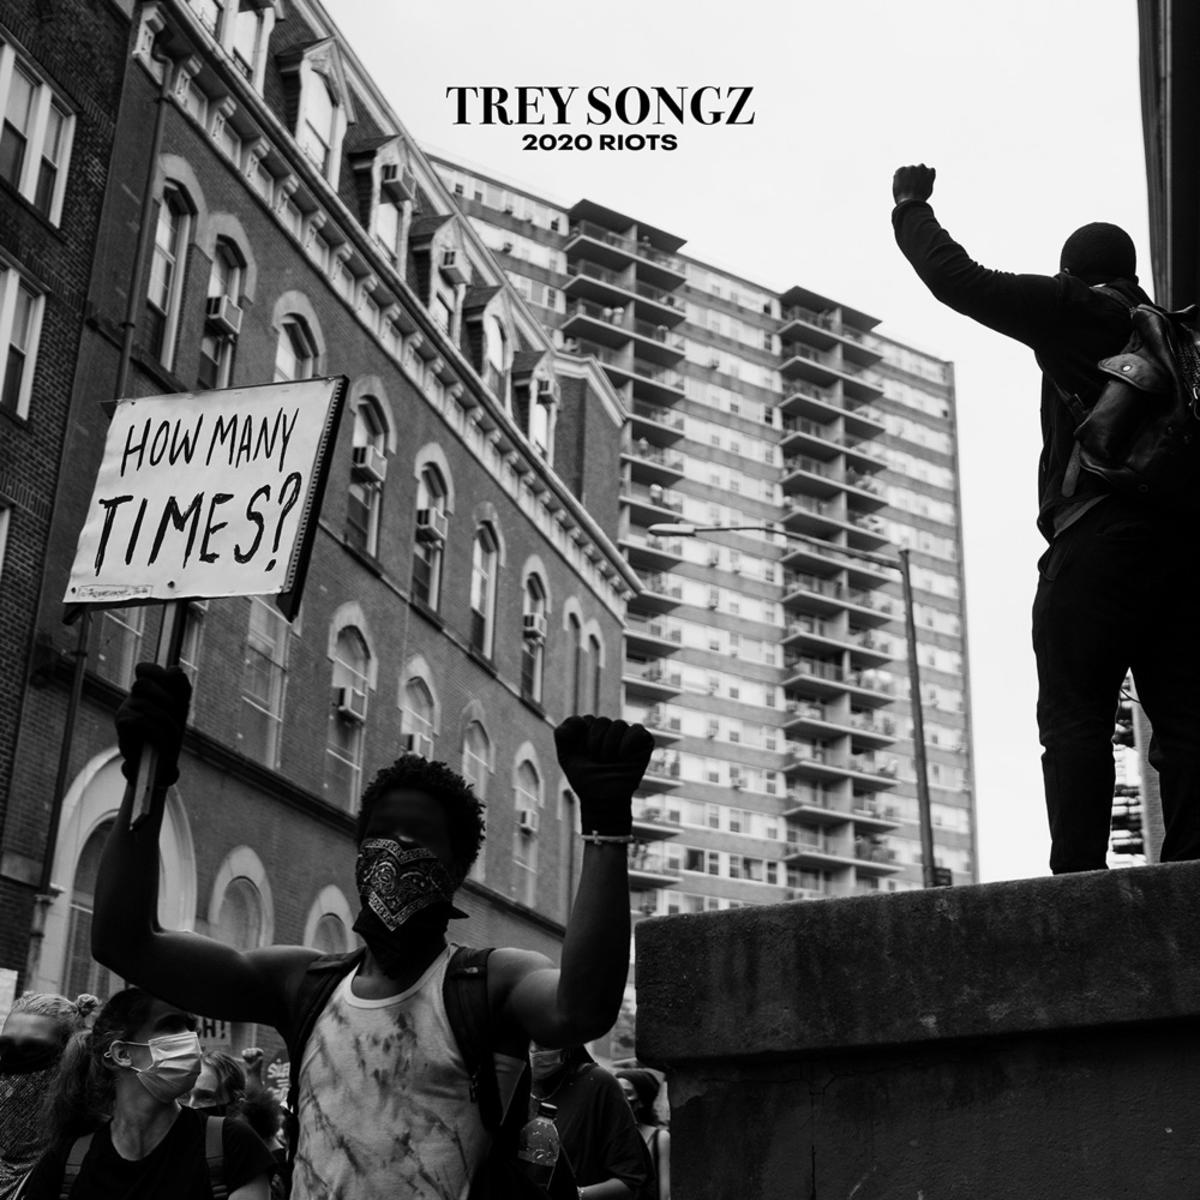 Trey Songz Releases The Very Powerful “2020 Riots: How Many Times”